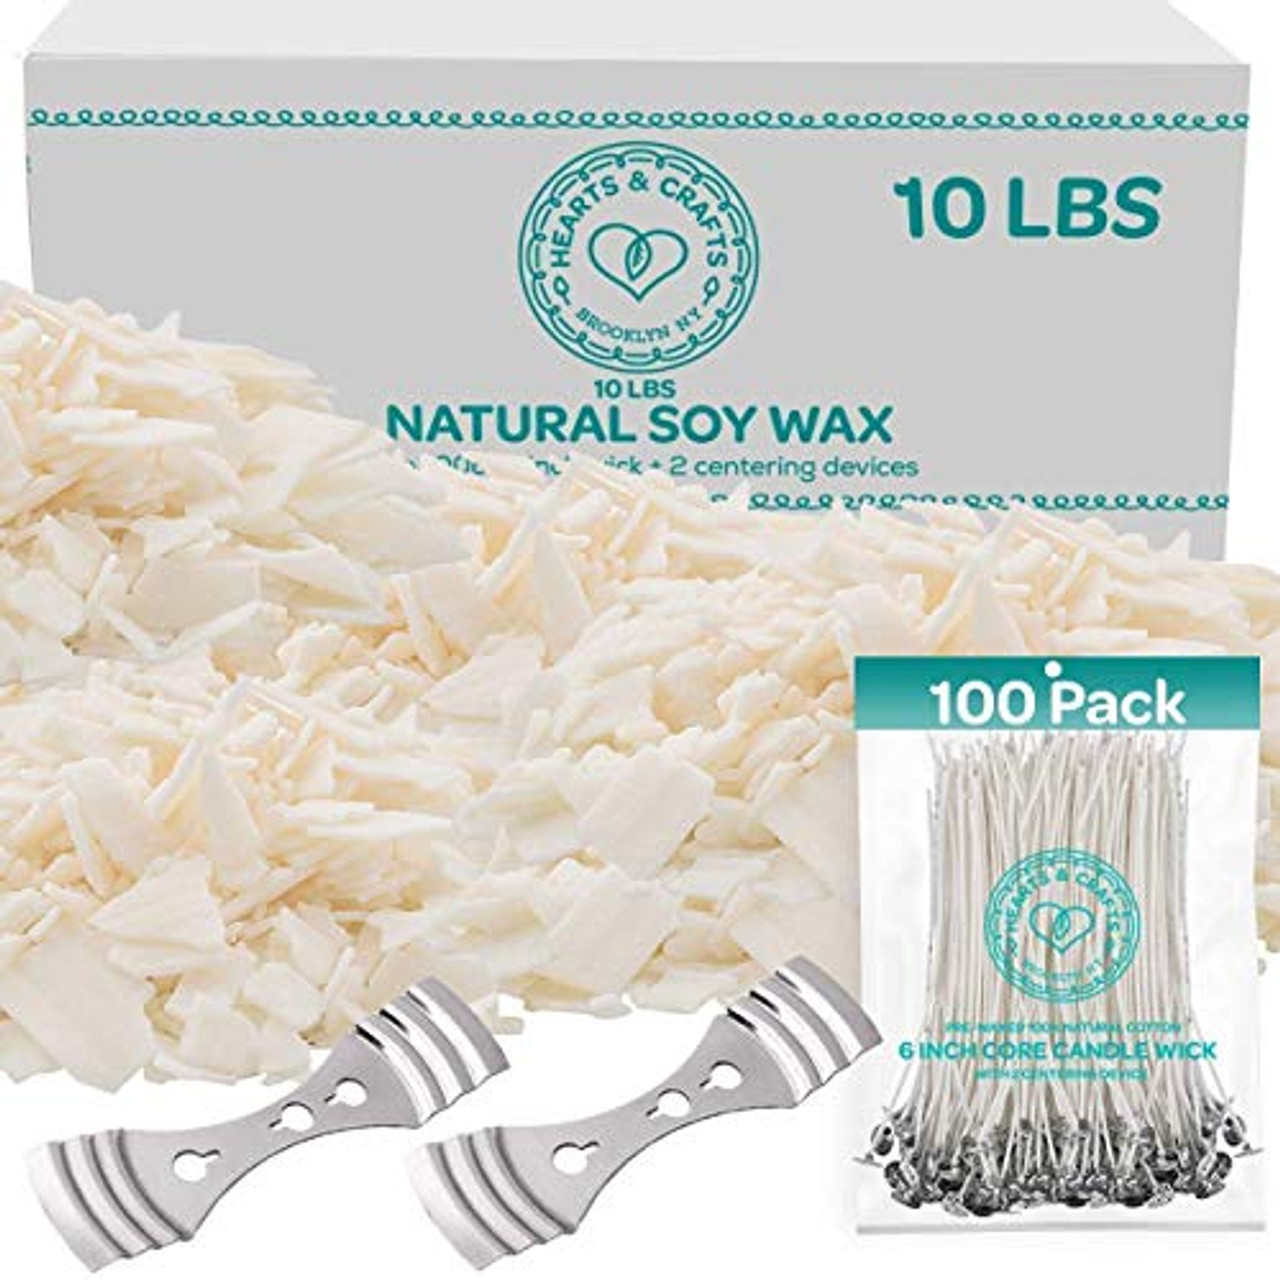 Candle Wax - DIY Candle Making Supplies with 5 LB Soy Wax for Candle Making  - Full Candle Making Kit for Adults and Kids with 5lb Soy Candle Wax